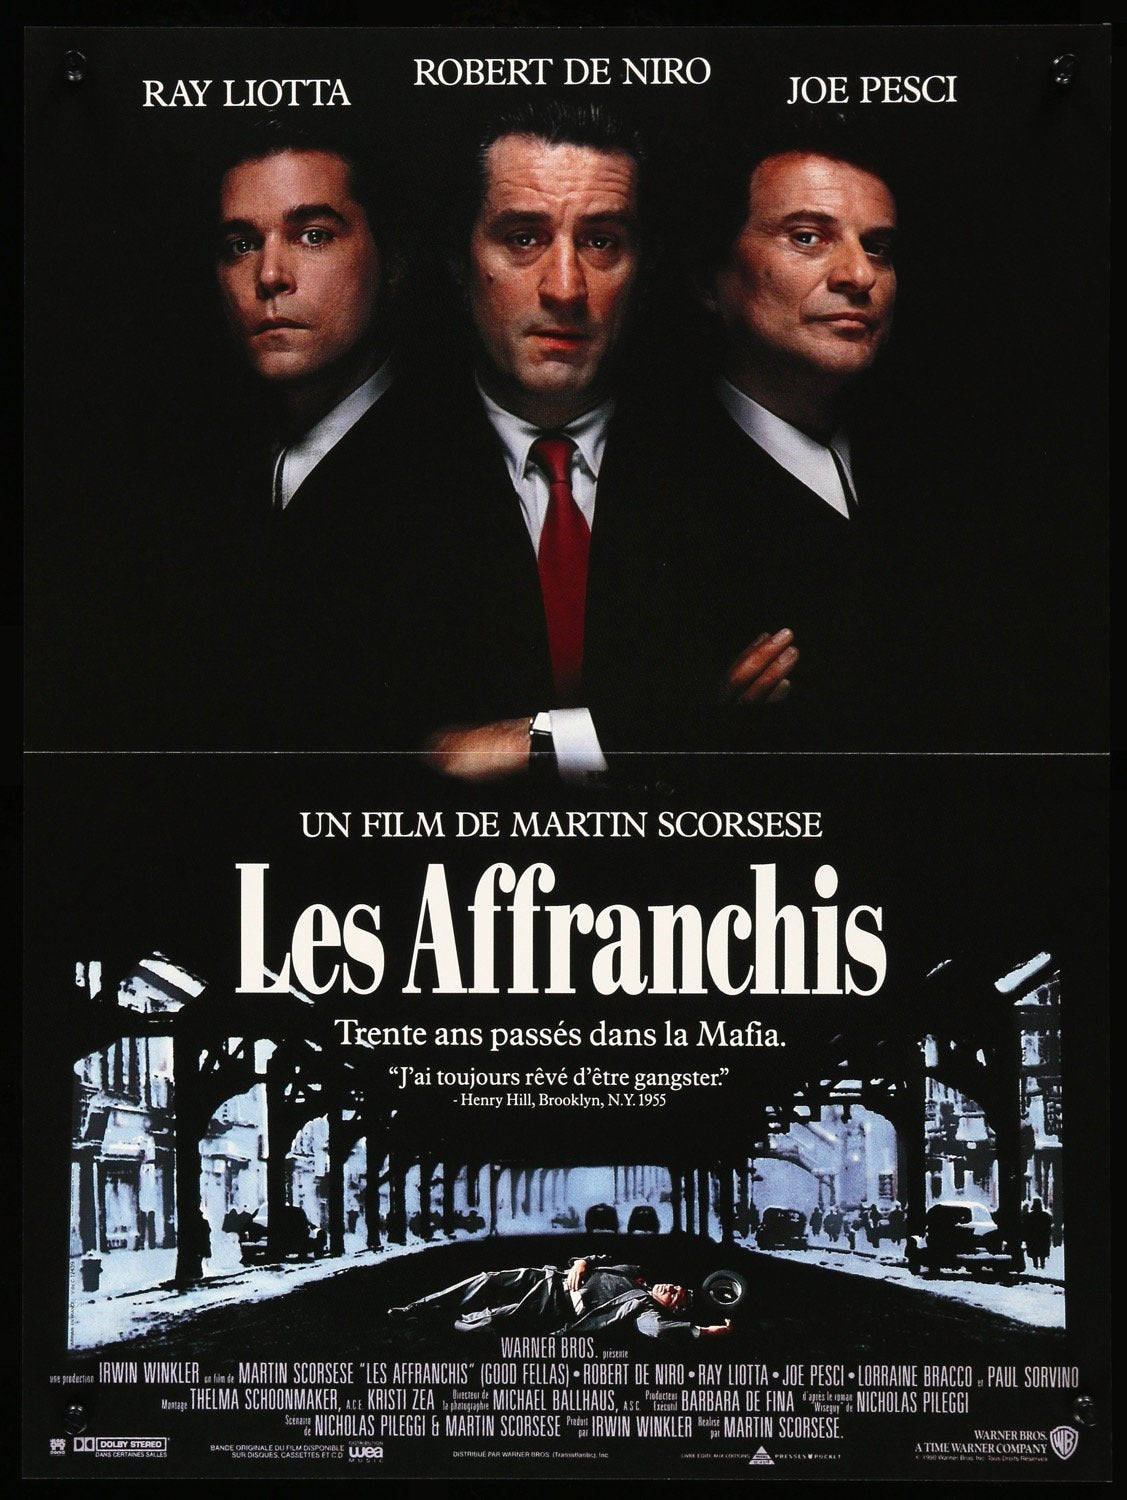 Goodfellas French Edition Poster Wallpaper